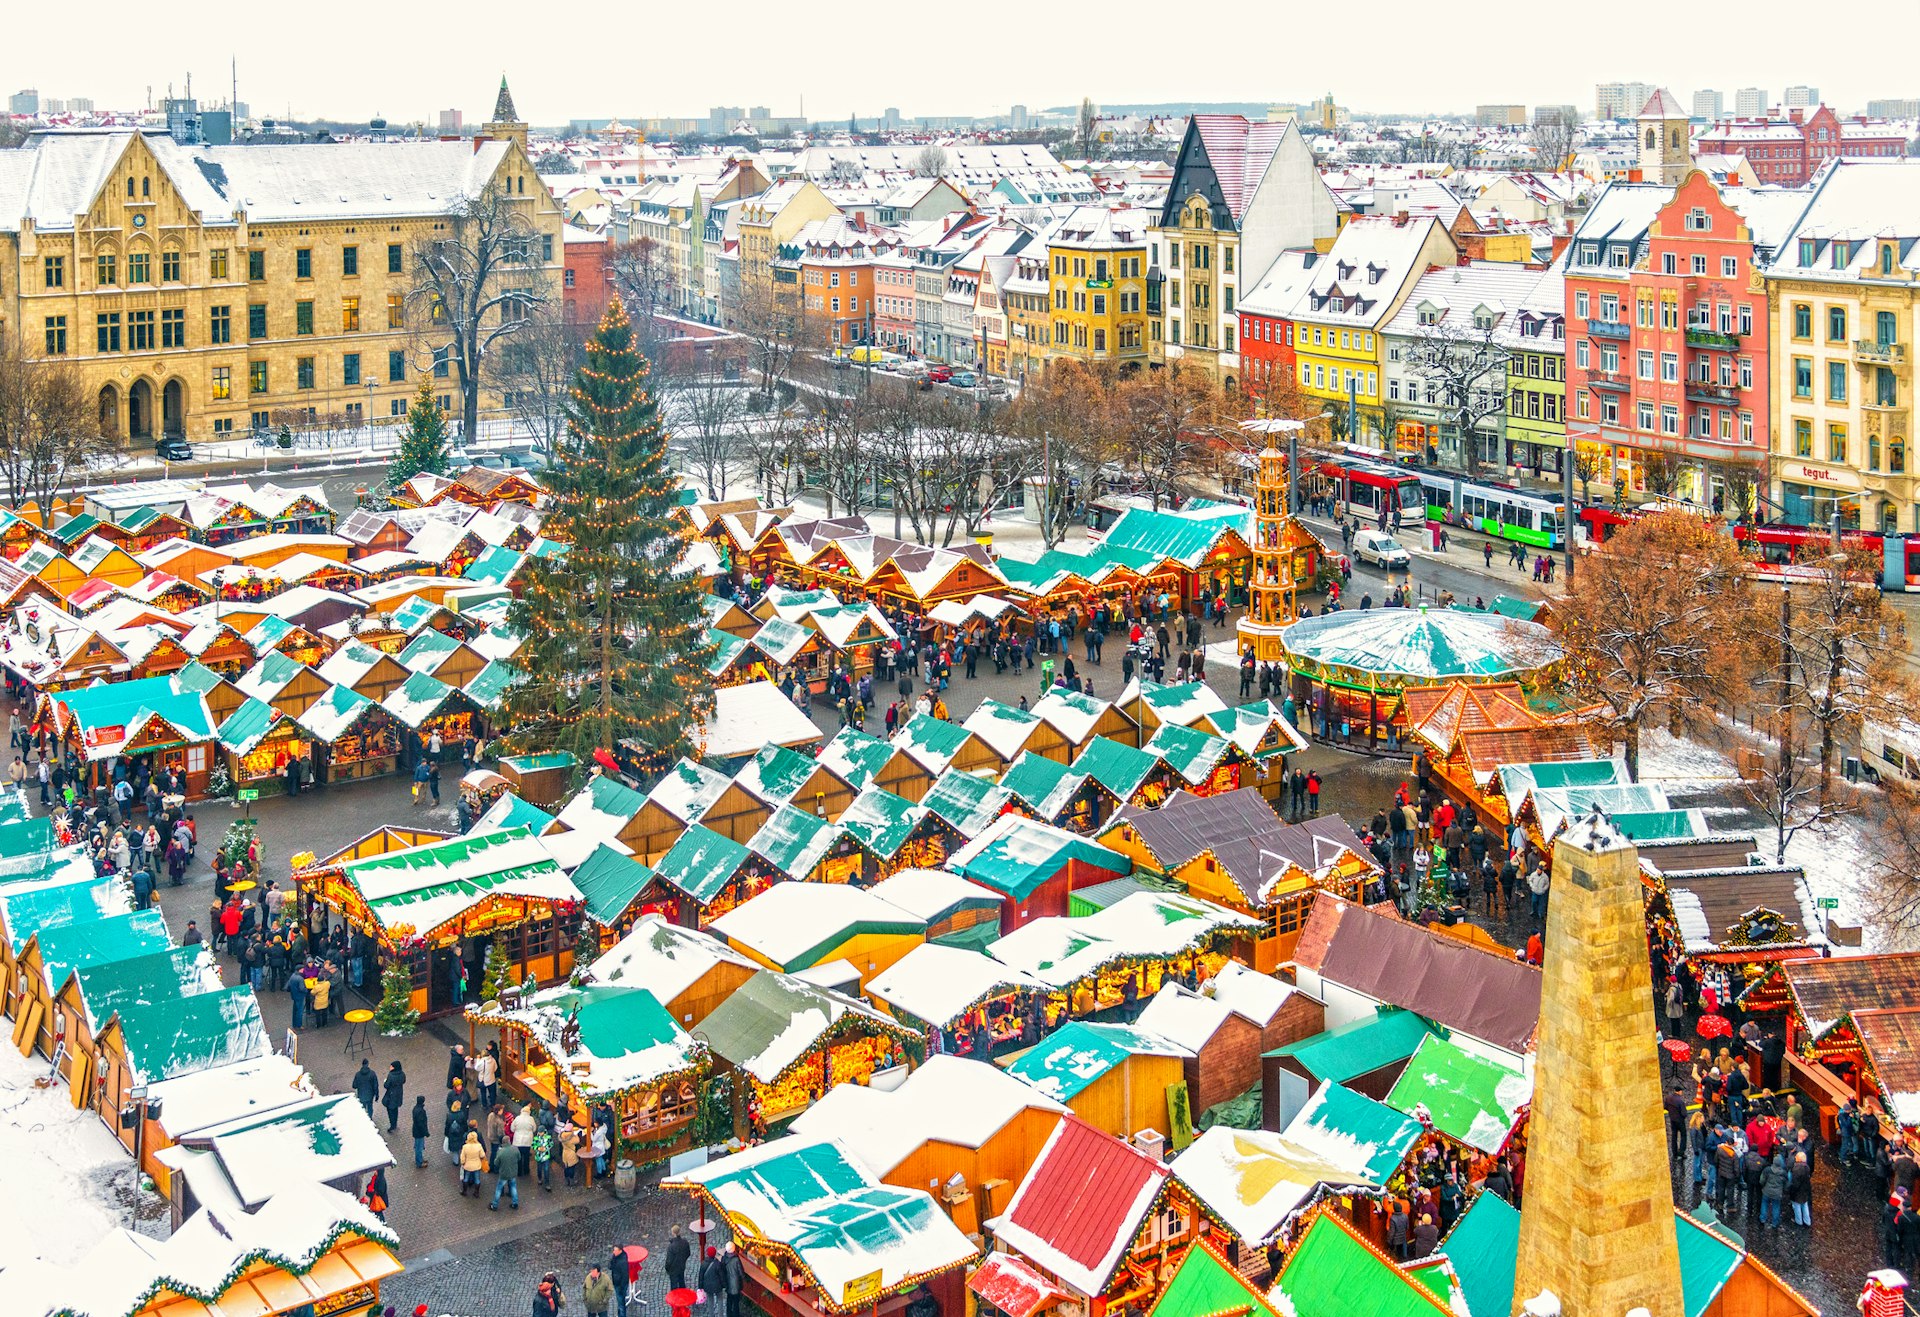 Elevated view over the historic city center of Erfurt and its famous Christmas market on a snowy late December afternoon